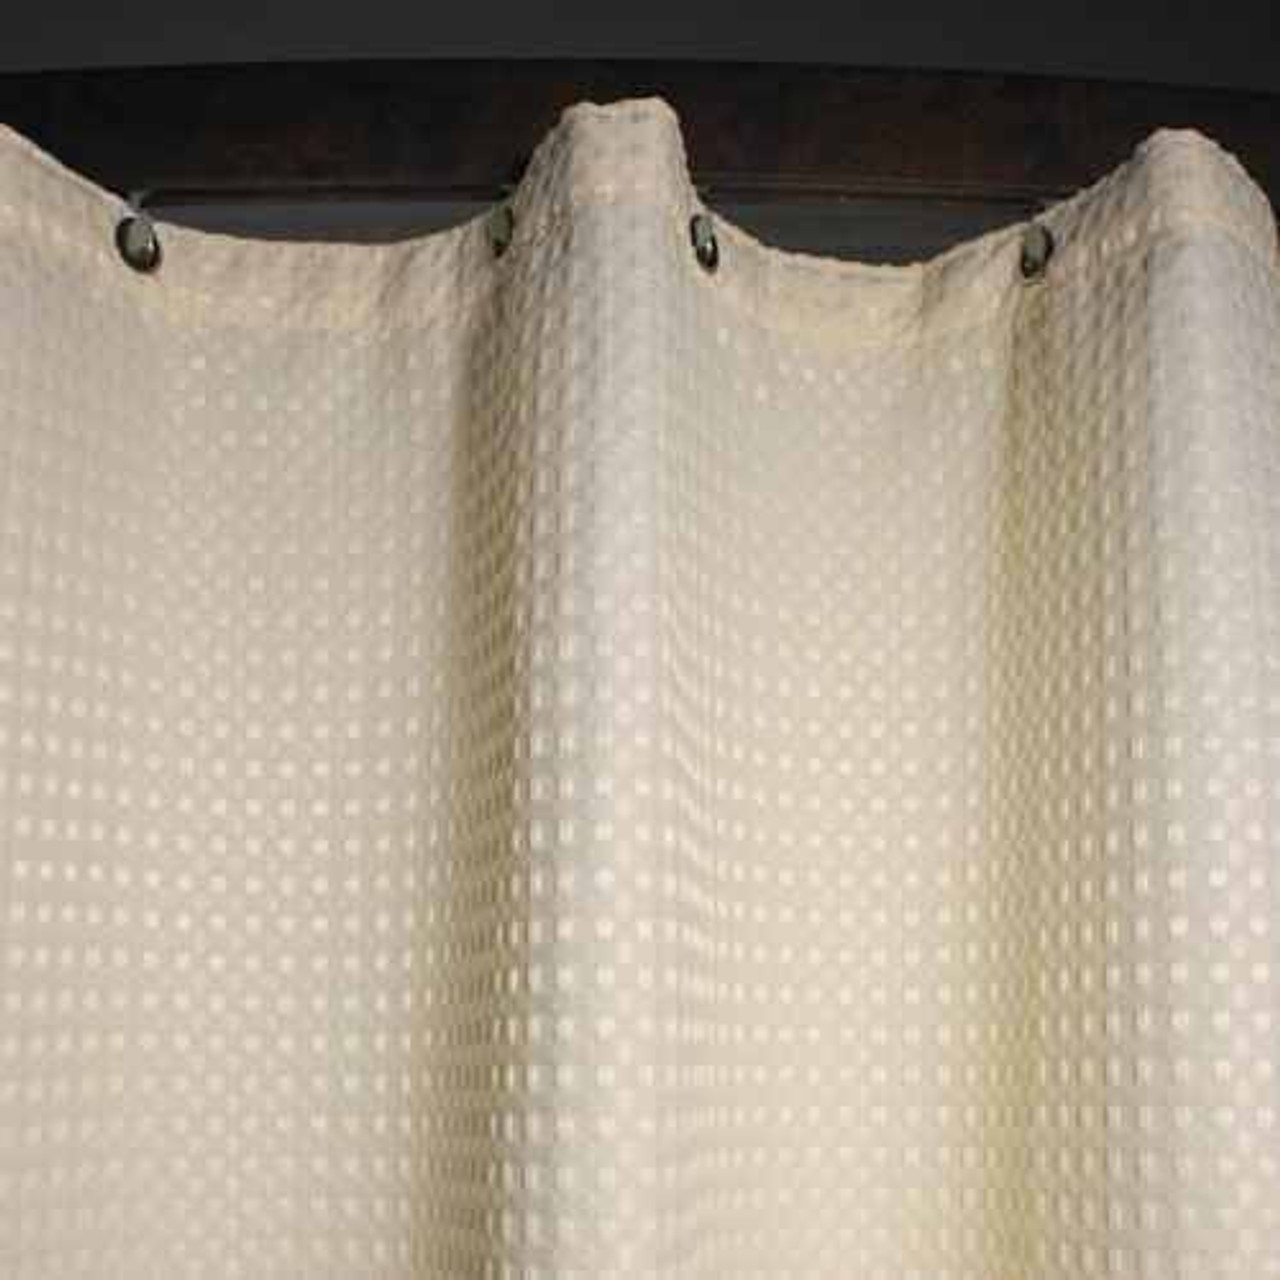 Kartri KARTRIor EXECUTIVEor WAFFLE FLAMEor RETARDANT POLYESTERor SHOWER CURTAIN W/ METAL GROMMETS PACK OF 6